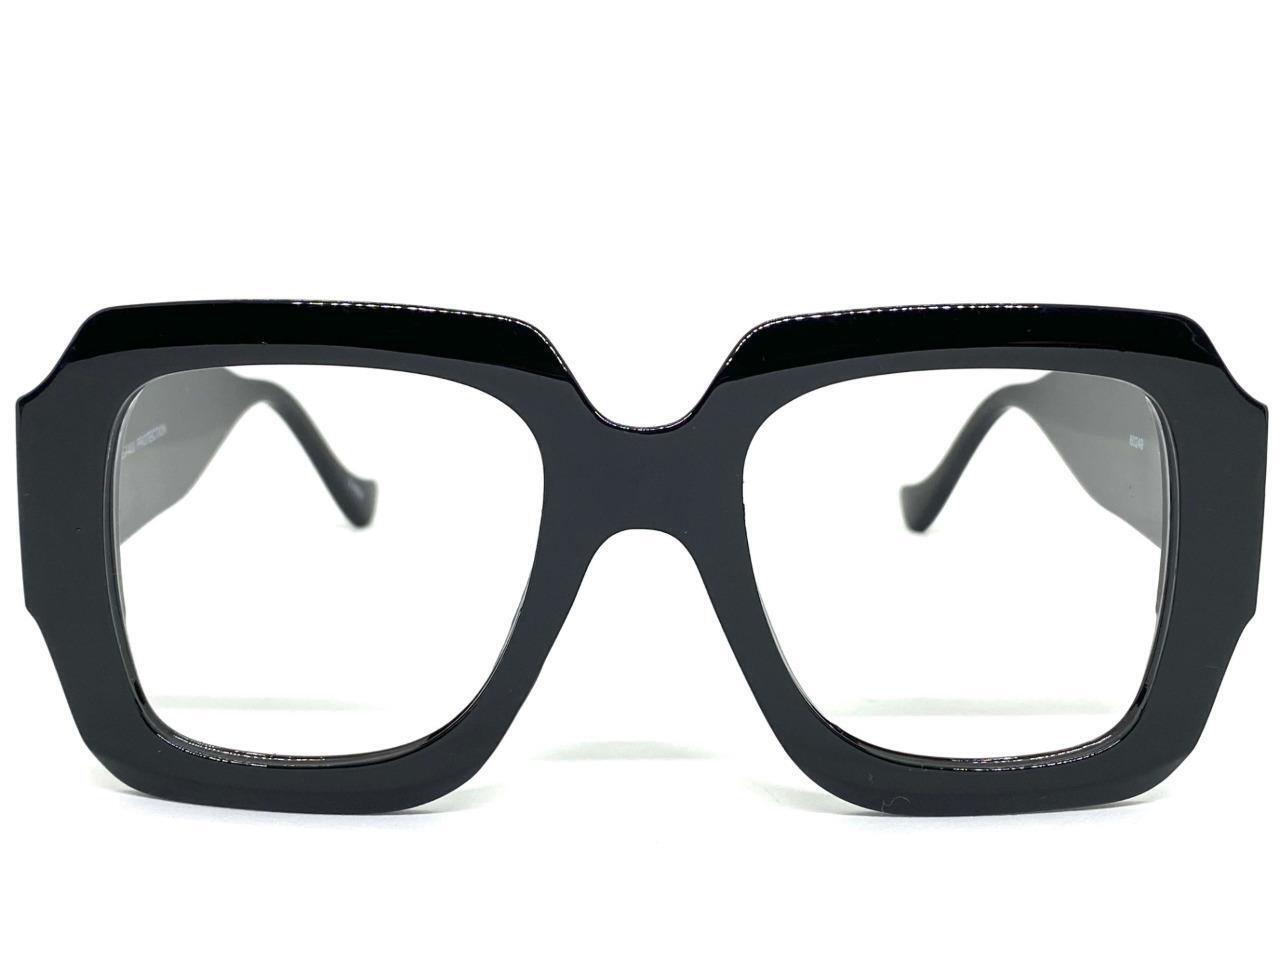 Big Glasses With Large Frames - Wide Style